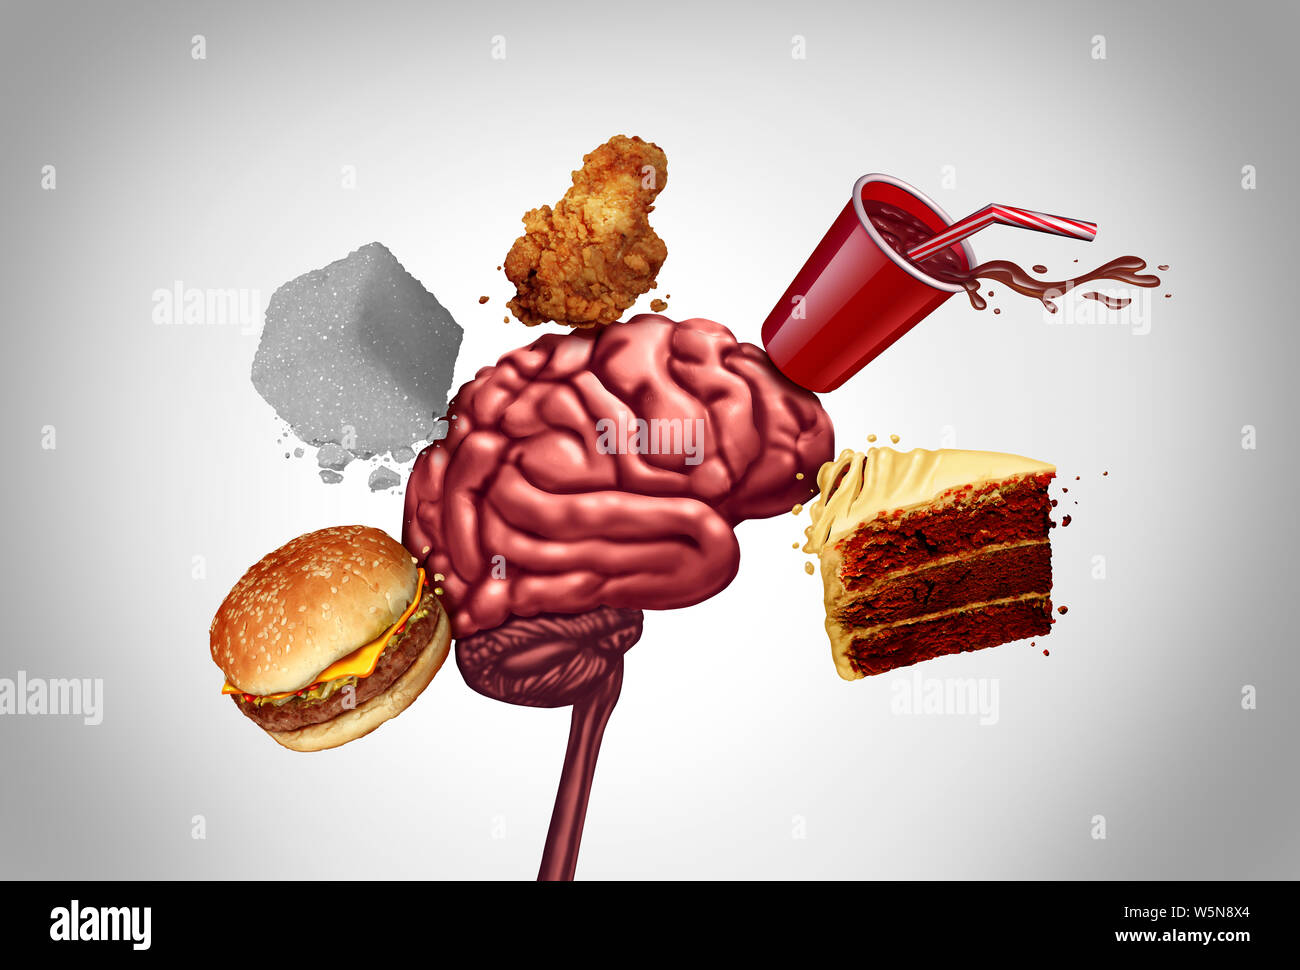 Junk food brain health and unhealthy nutrition choices for mental function as a human thinking organ being hit by a cheeseburger sugar soft drink. Stock Photo